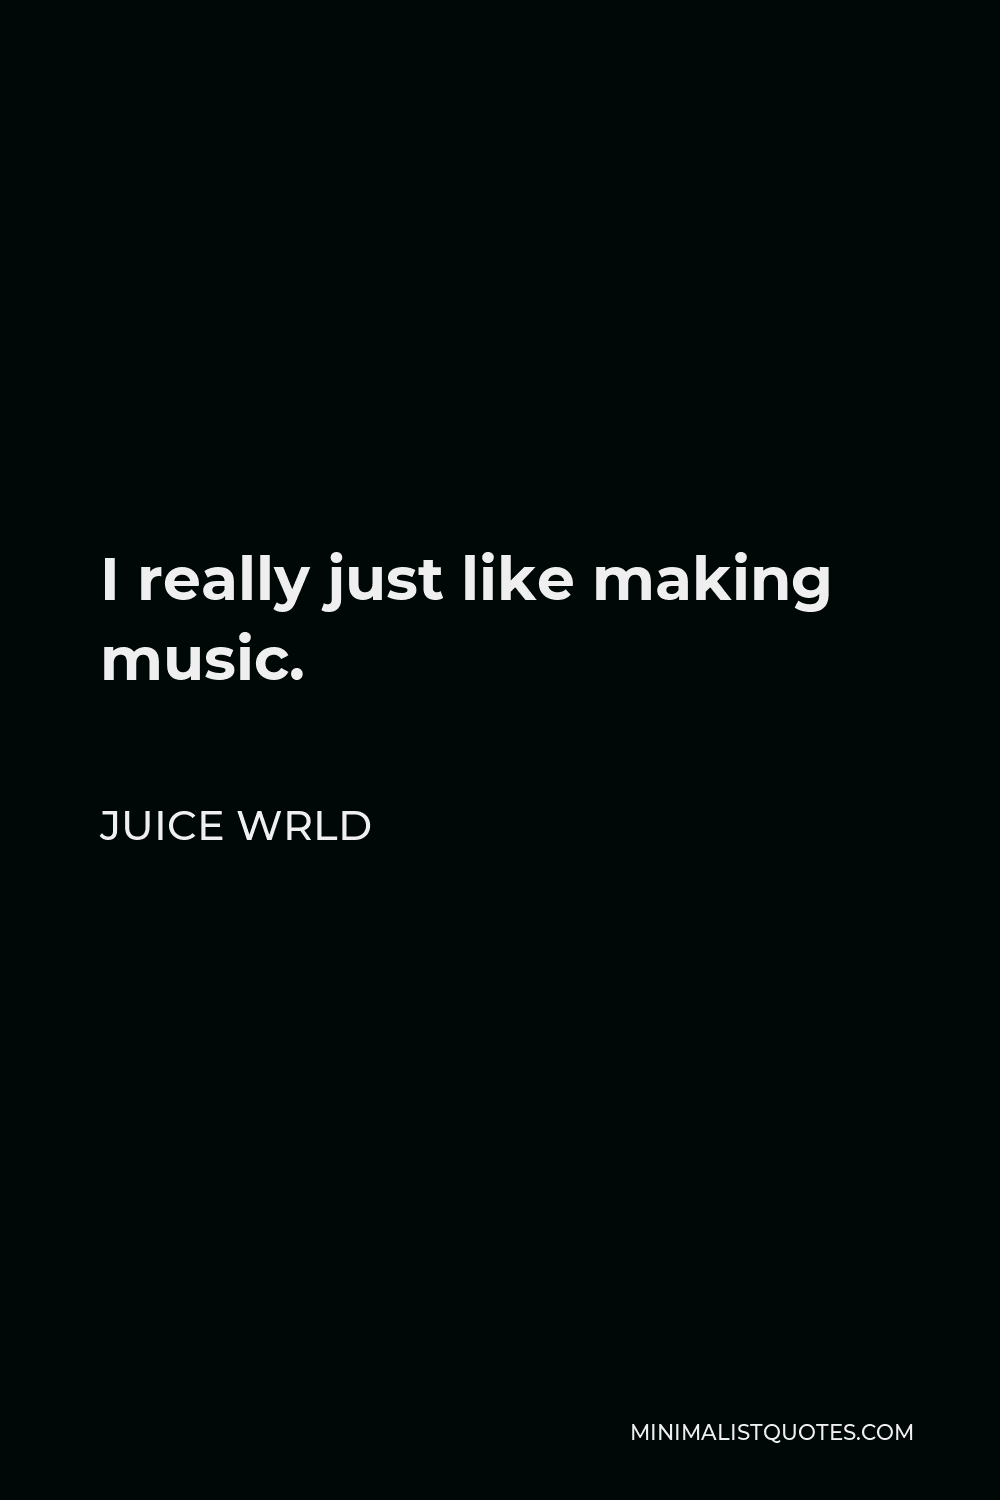 Juice Wrld Quote - I really just like making music.